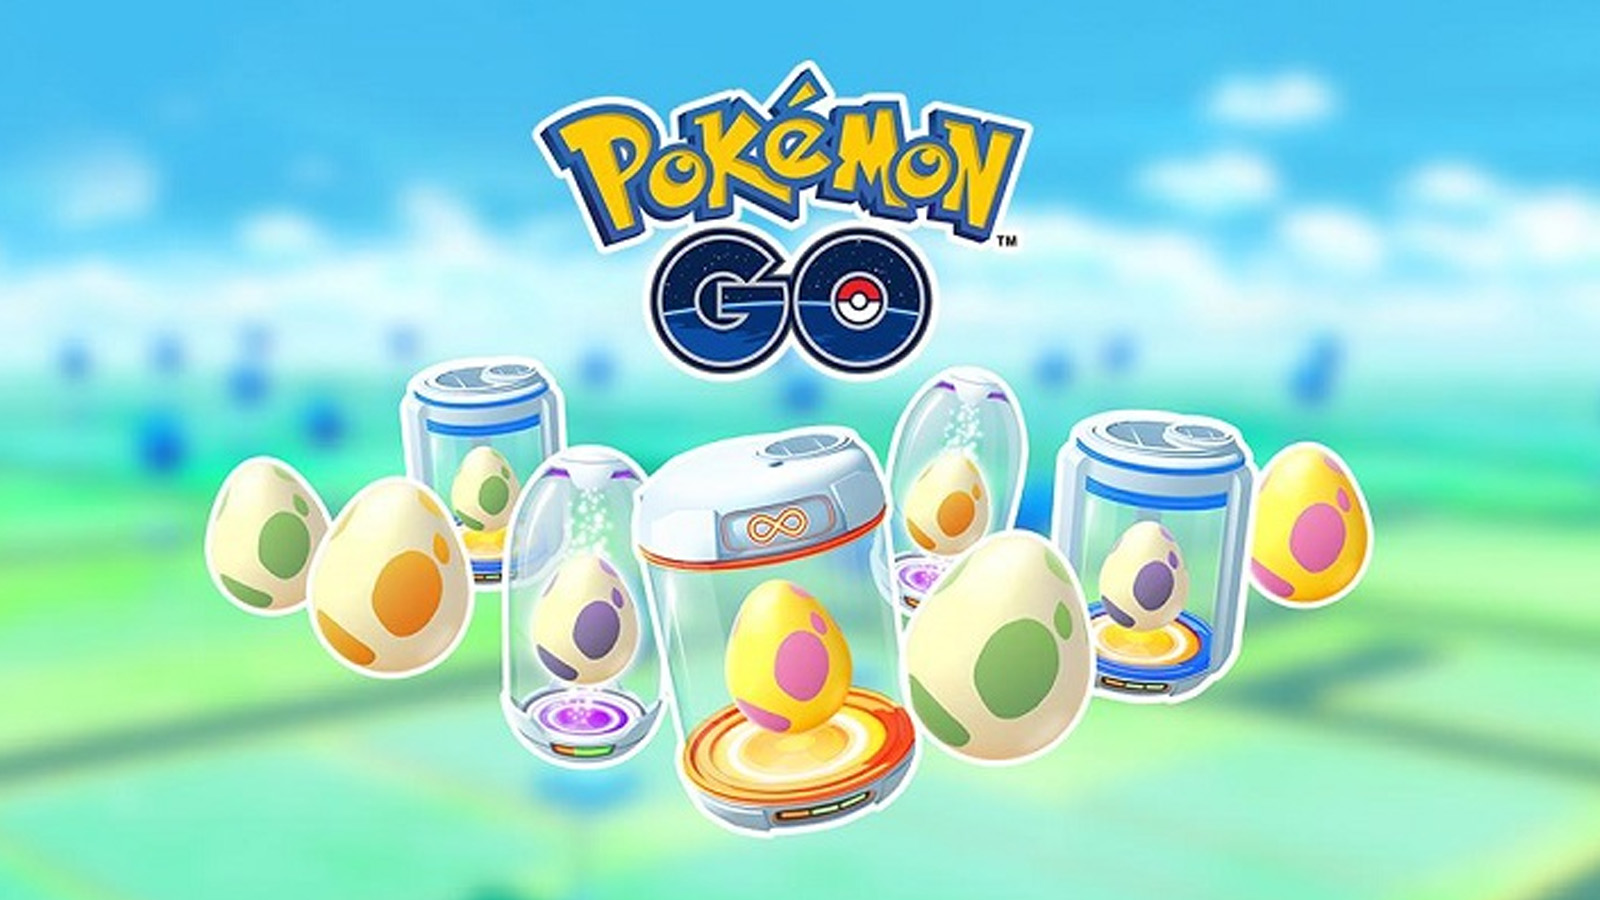 Pokemon Go players are frustrated by one 'worthless' egg color.